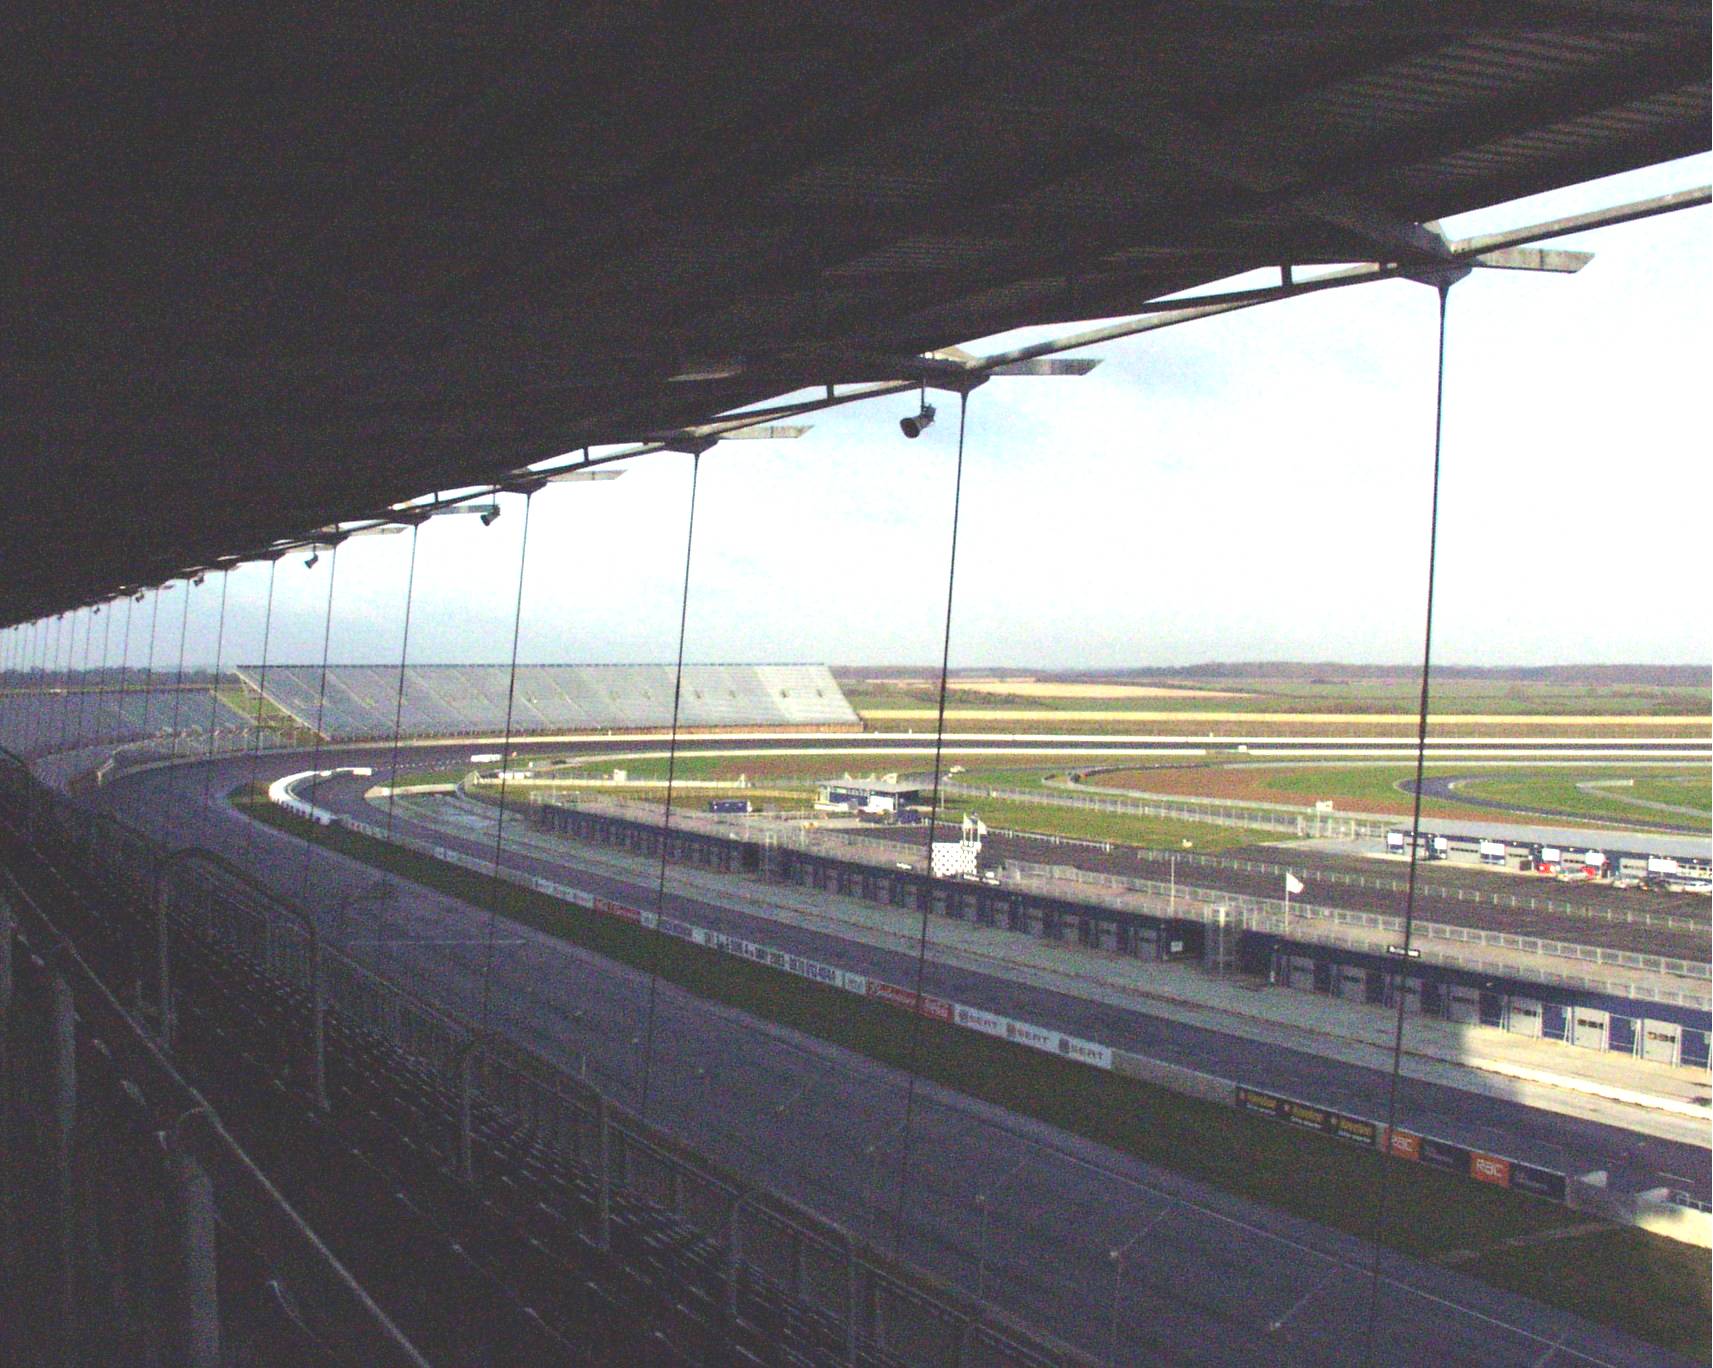 Rockingham circuit viewed from grandstand